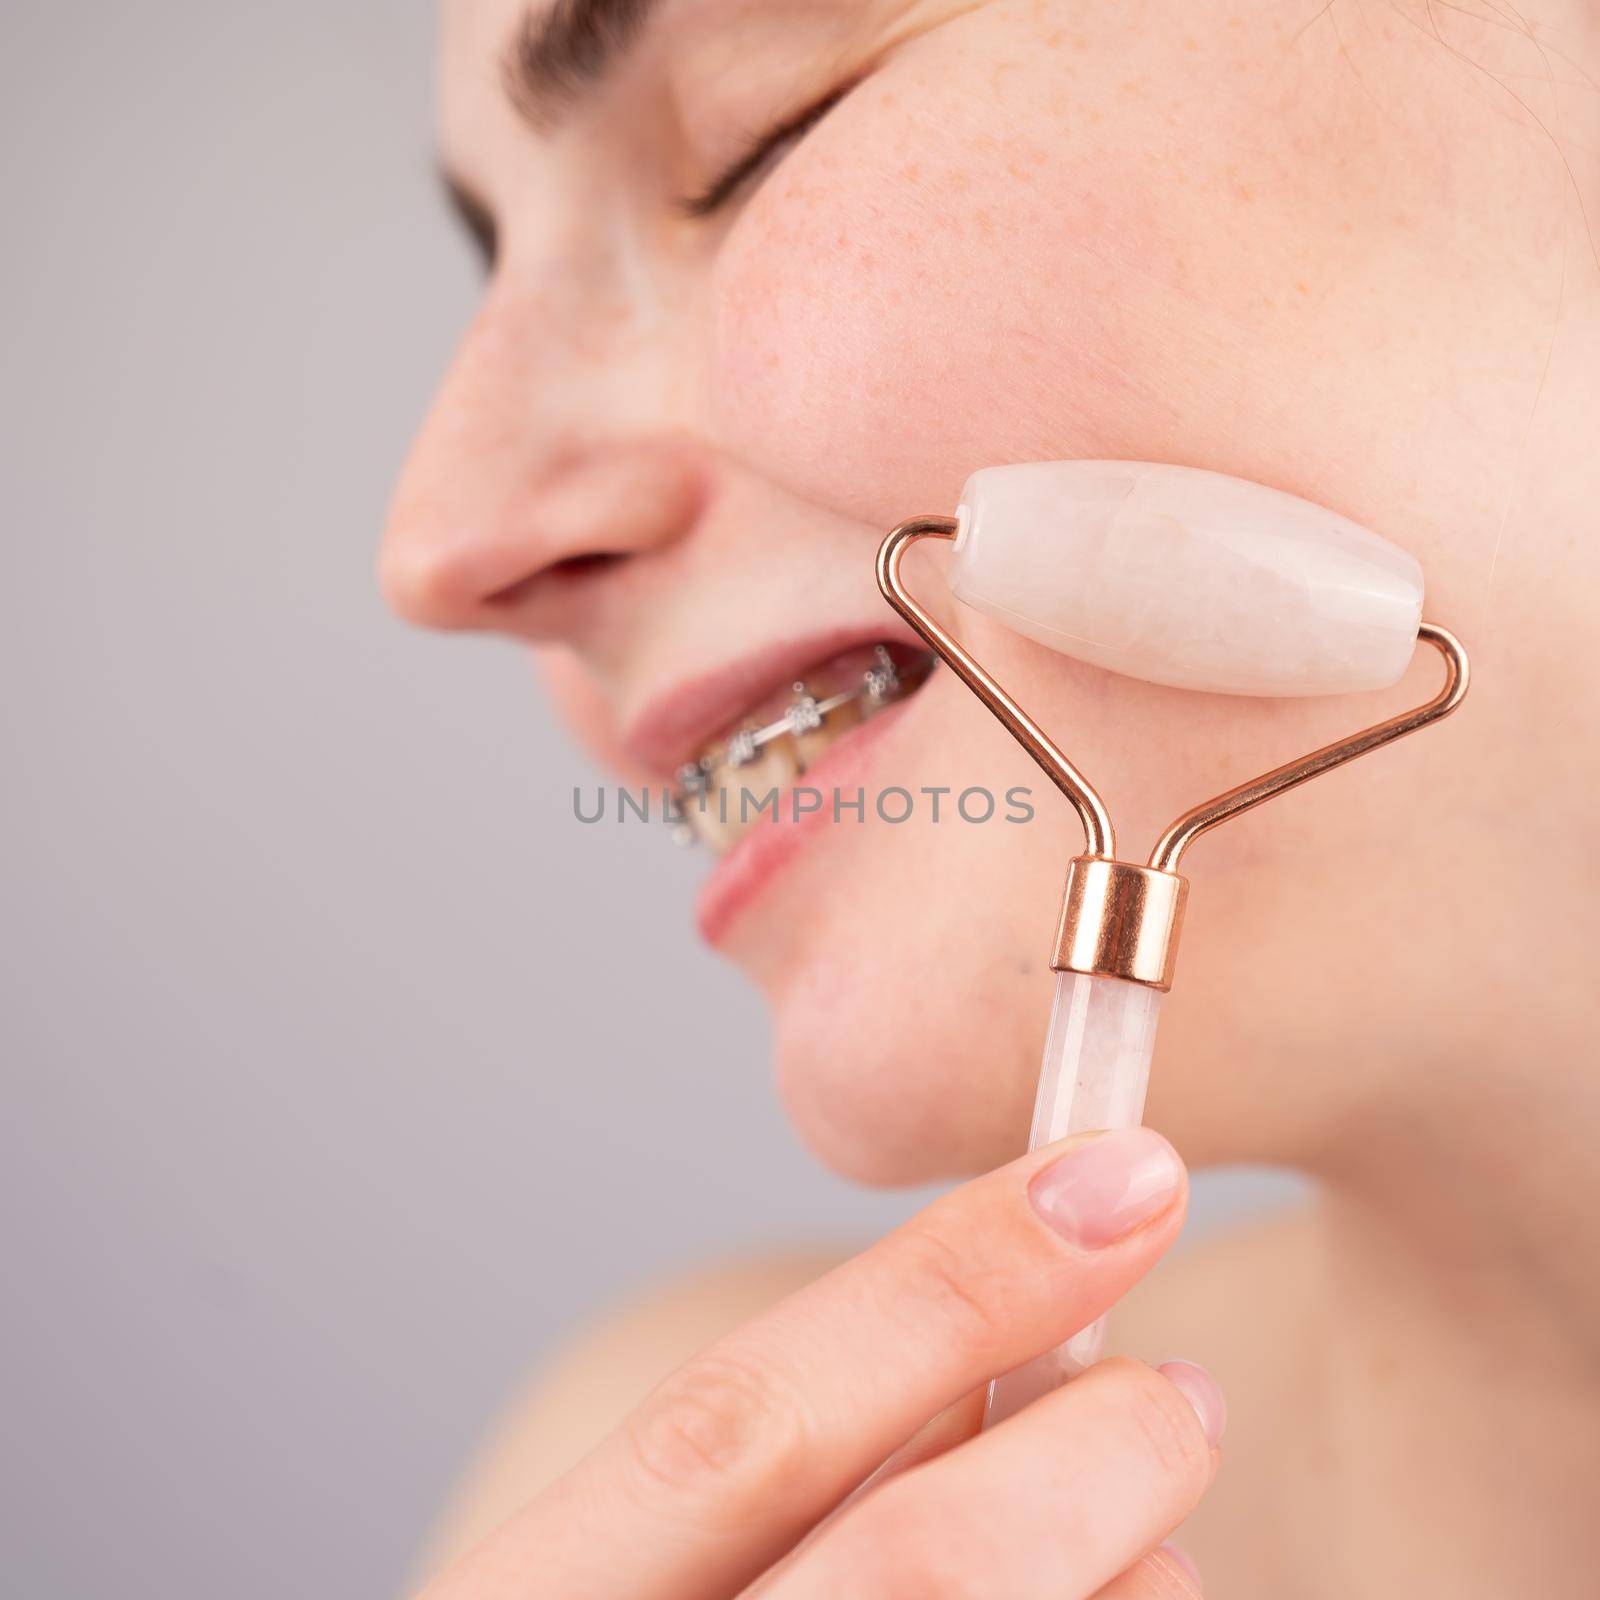 Close-up portrait of a woman uses a quartz roller massager to smooth wrinkles on her forehead. by mrwed54